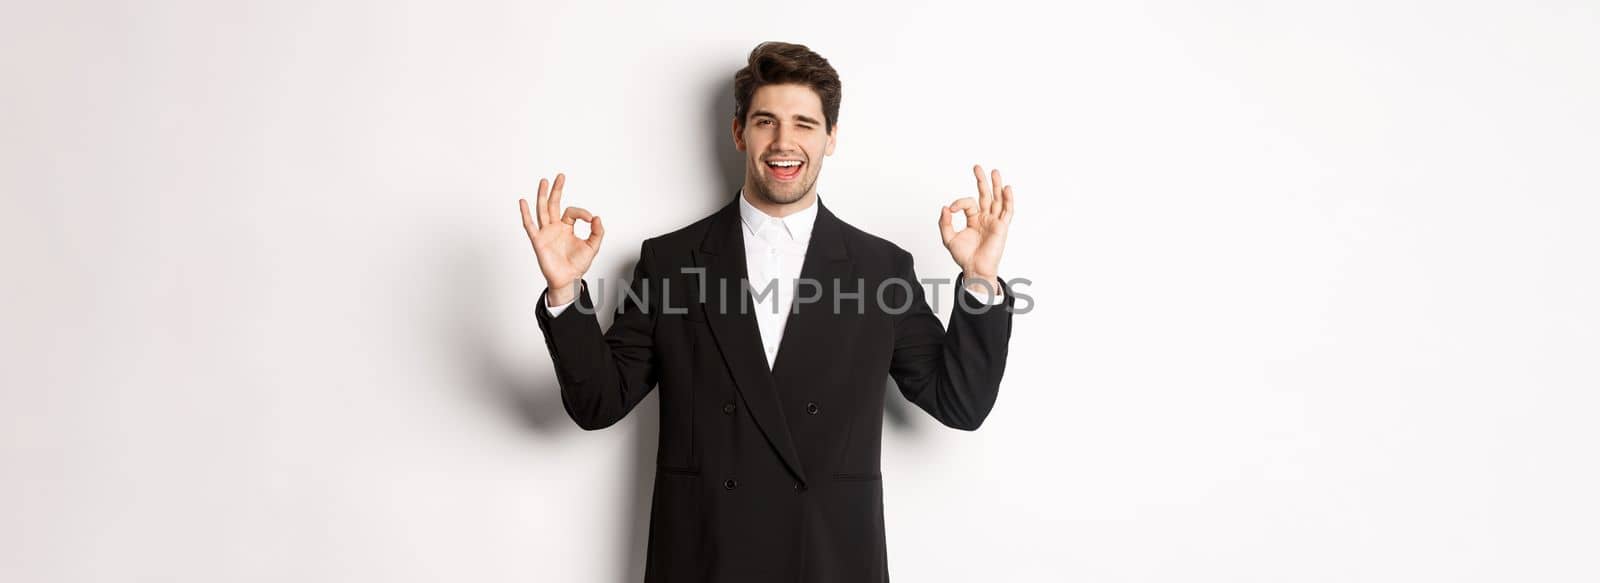 Concept of new year party, celebration and lifestyle. Portrait of successful handsome businessman in suit, winking and showing okay signs, recommending something good, white background.